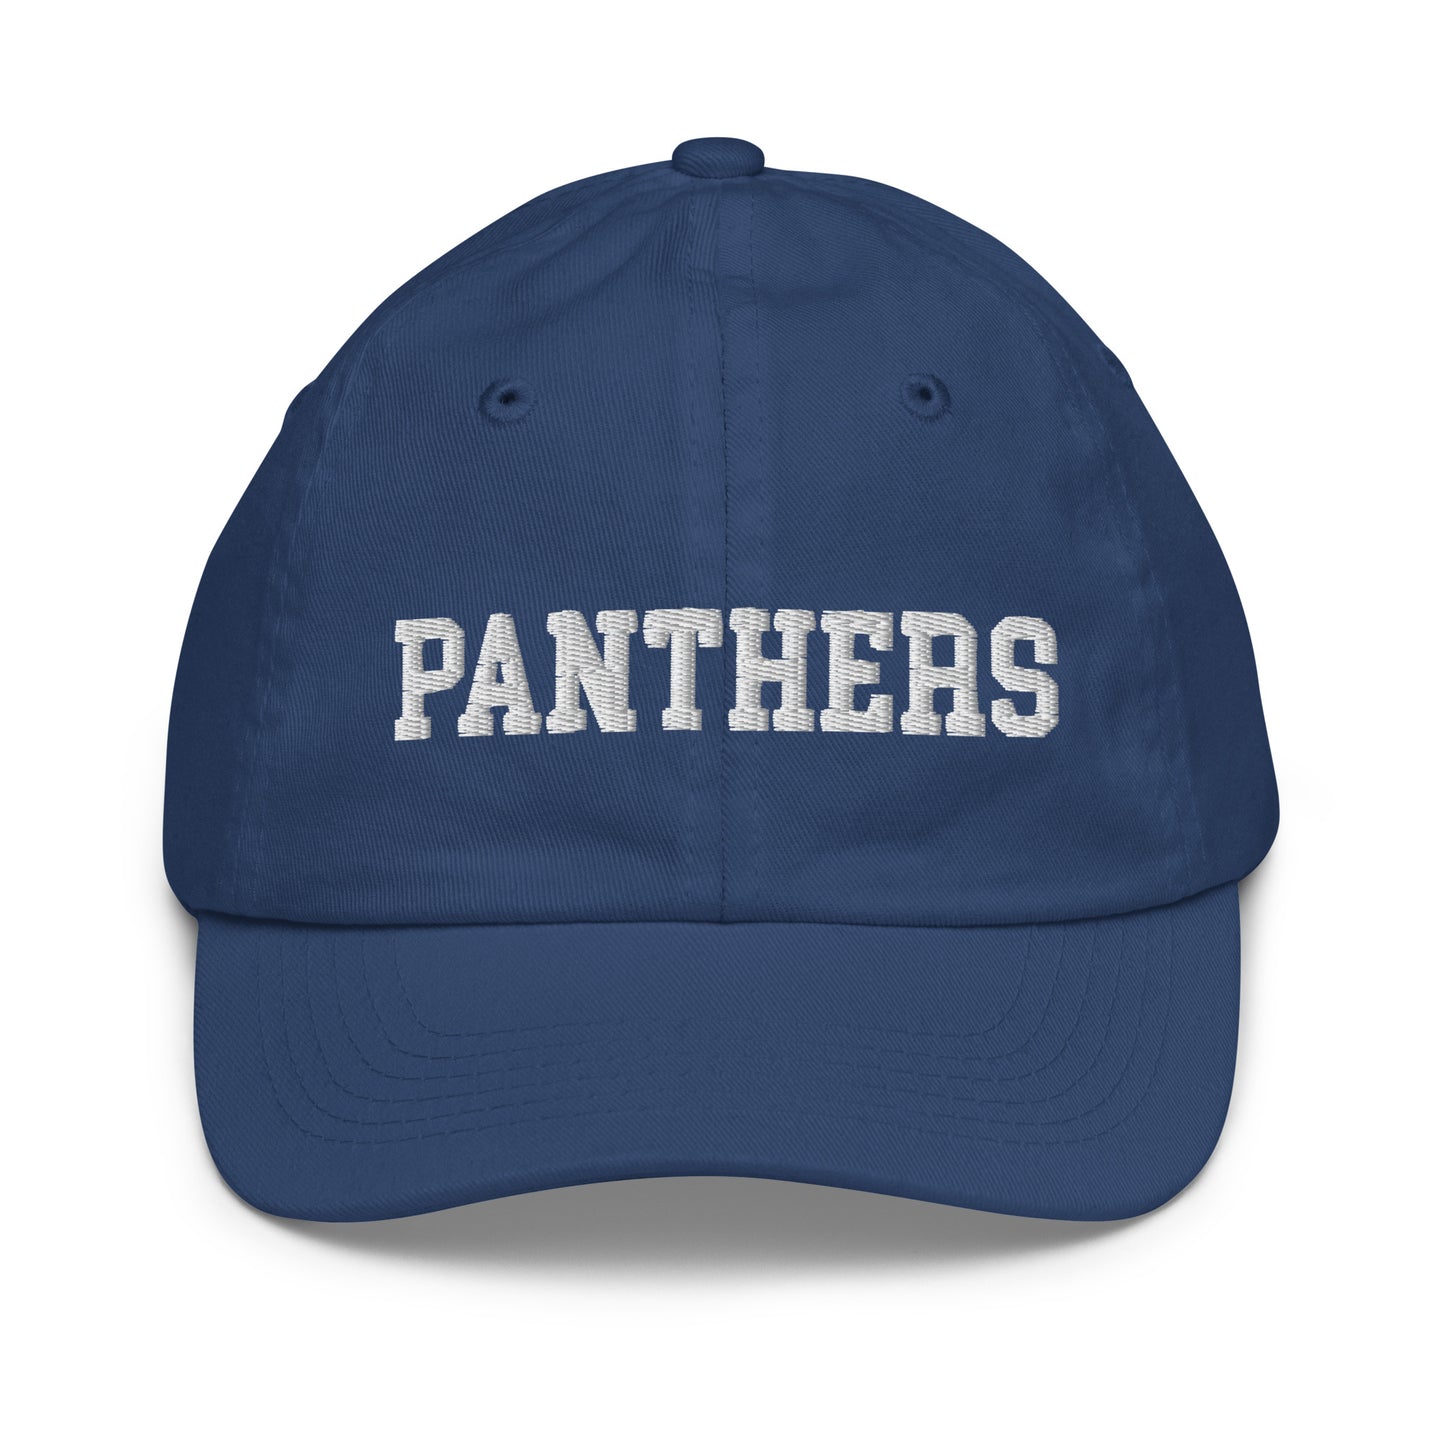 Panthers Youth Hat